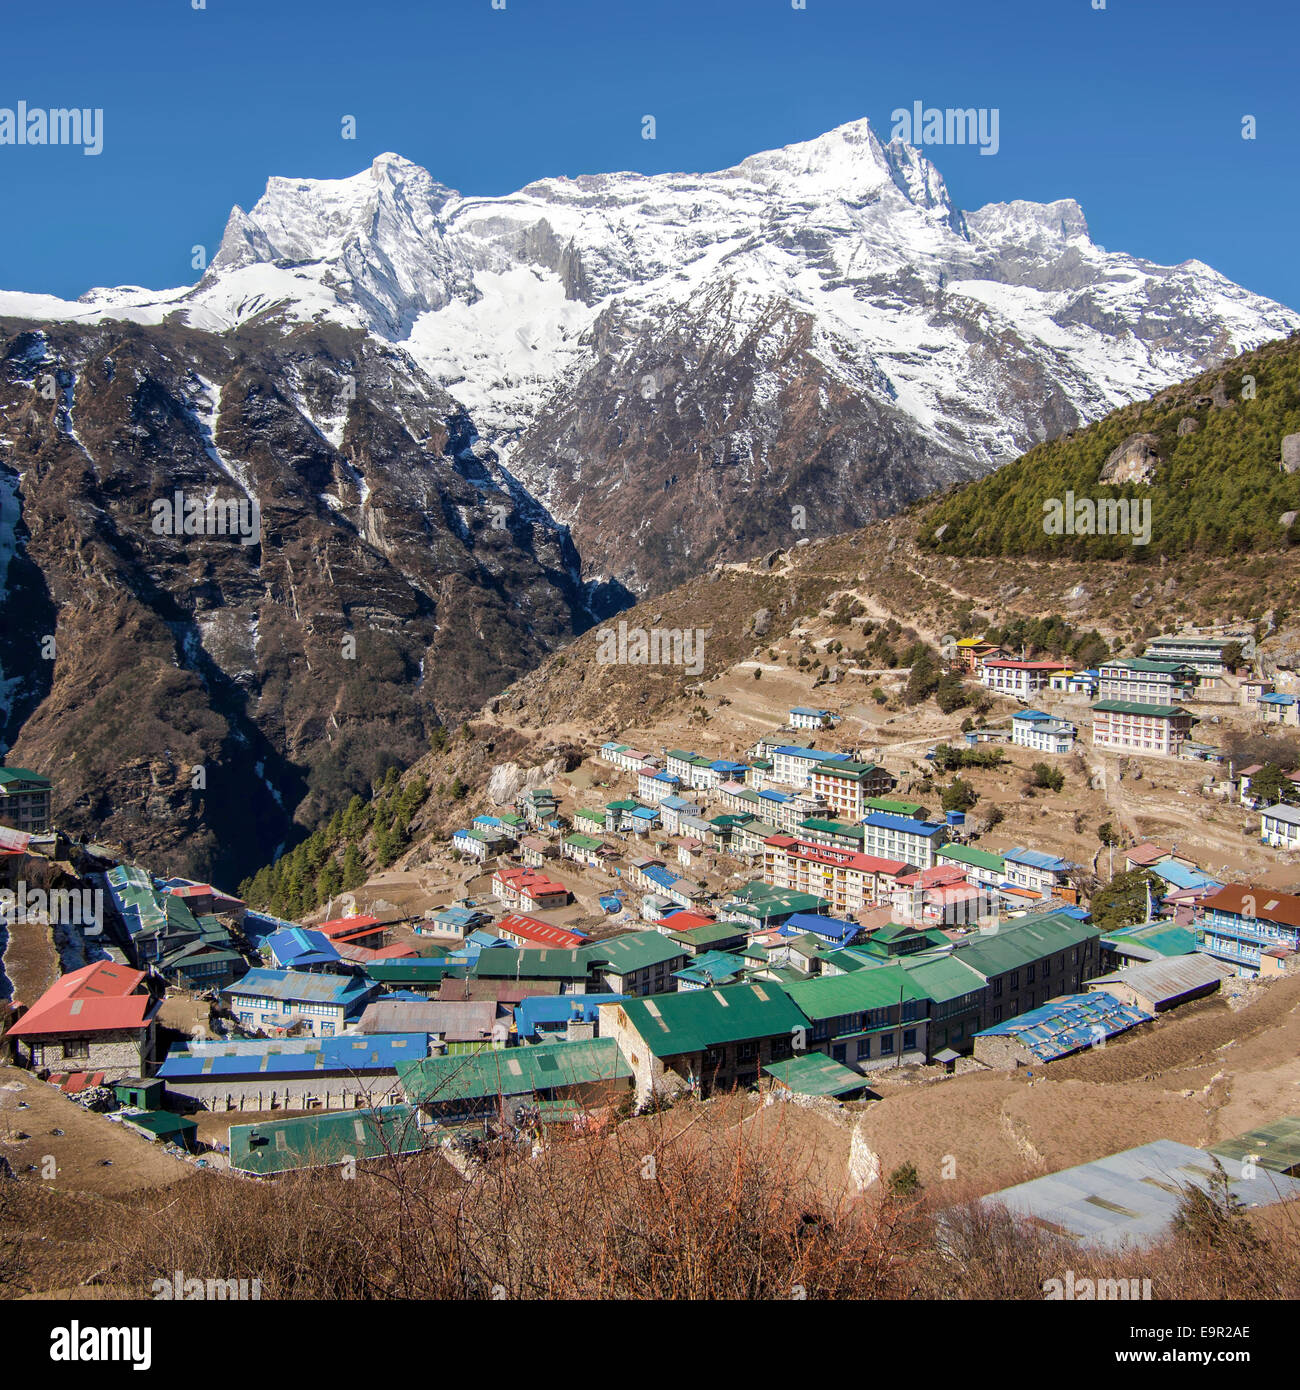 The Himalayan settlement of Namche Bazaar, an important sherpa village along the Everest Base Camp Trek in Nepal. Stock Photo